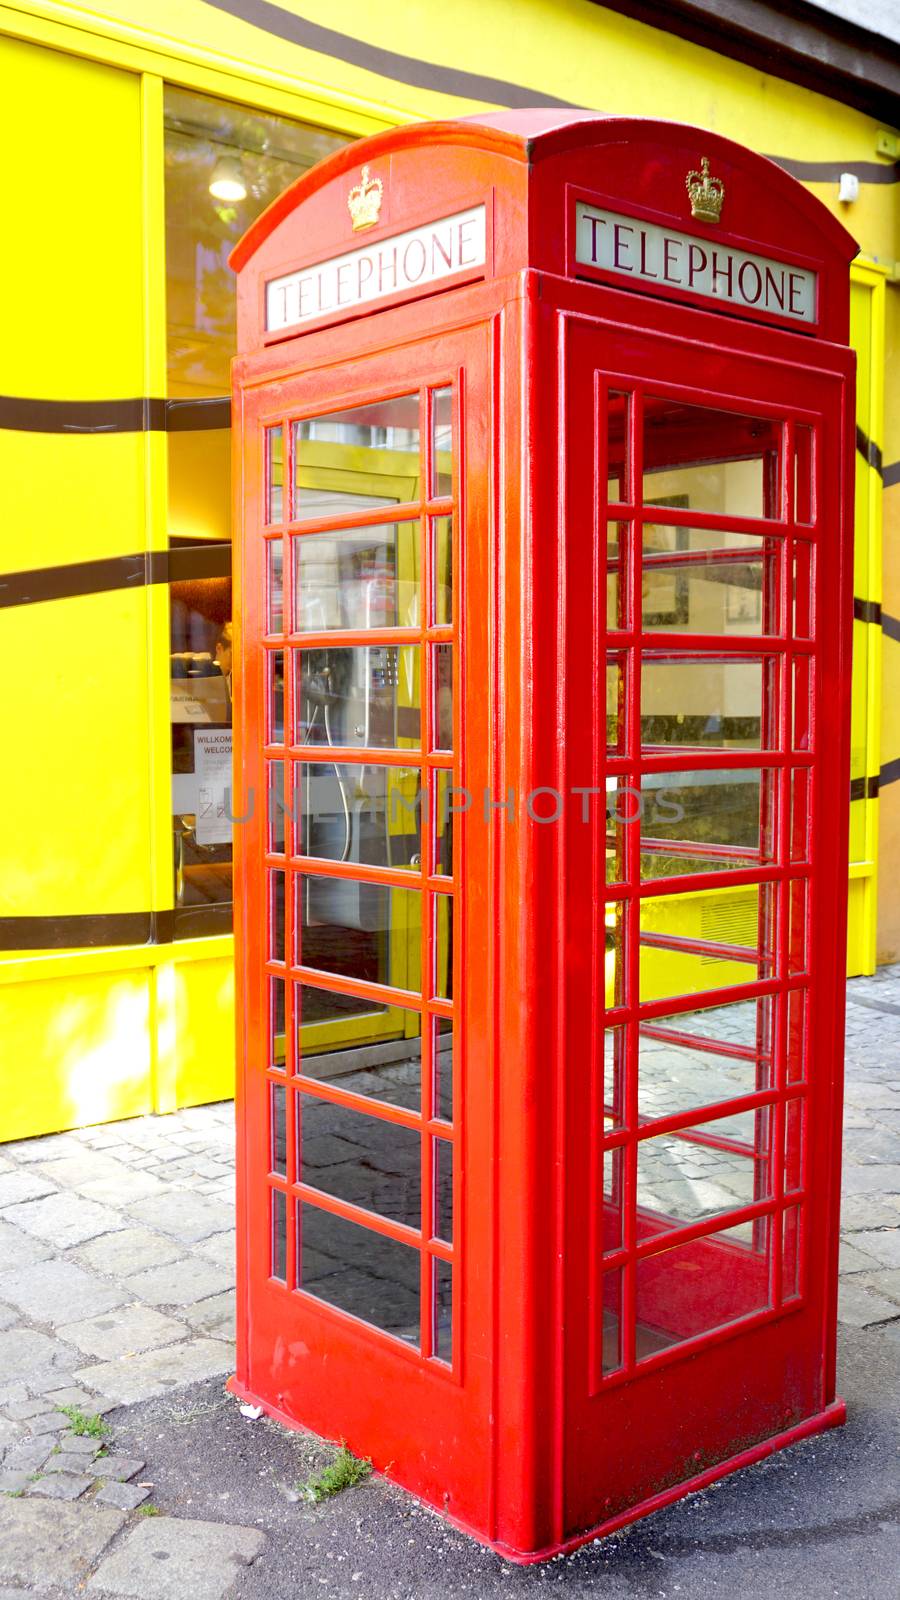 Red telephone booth traditional in Europe